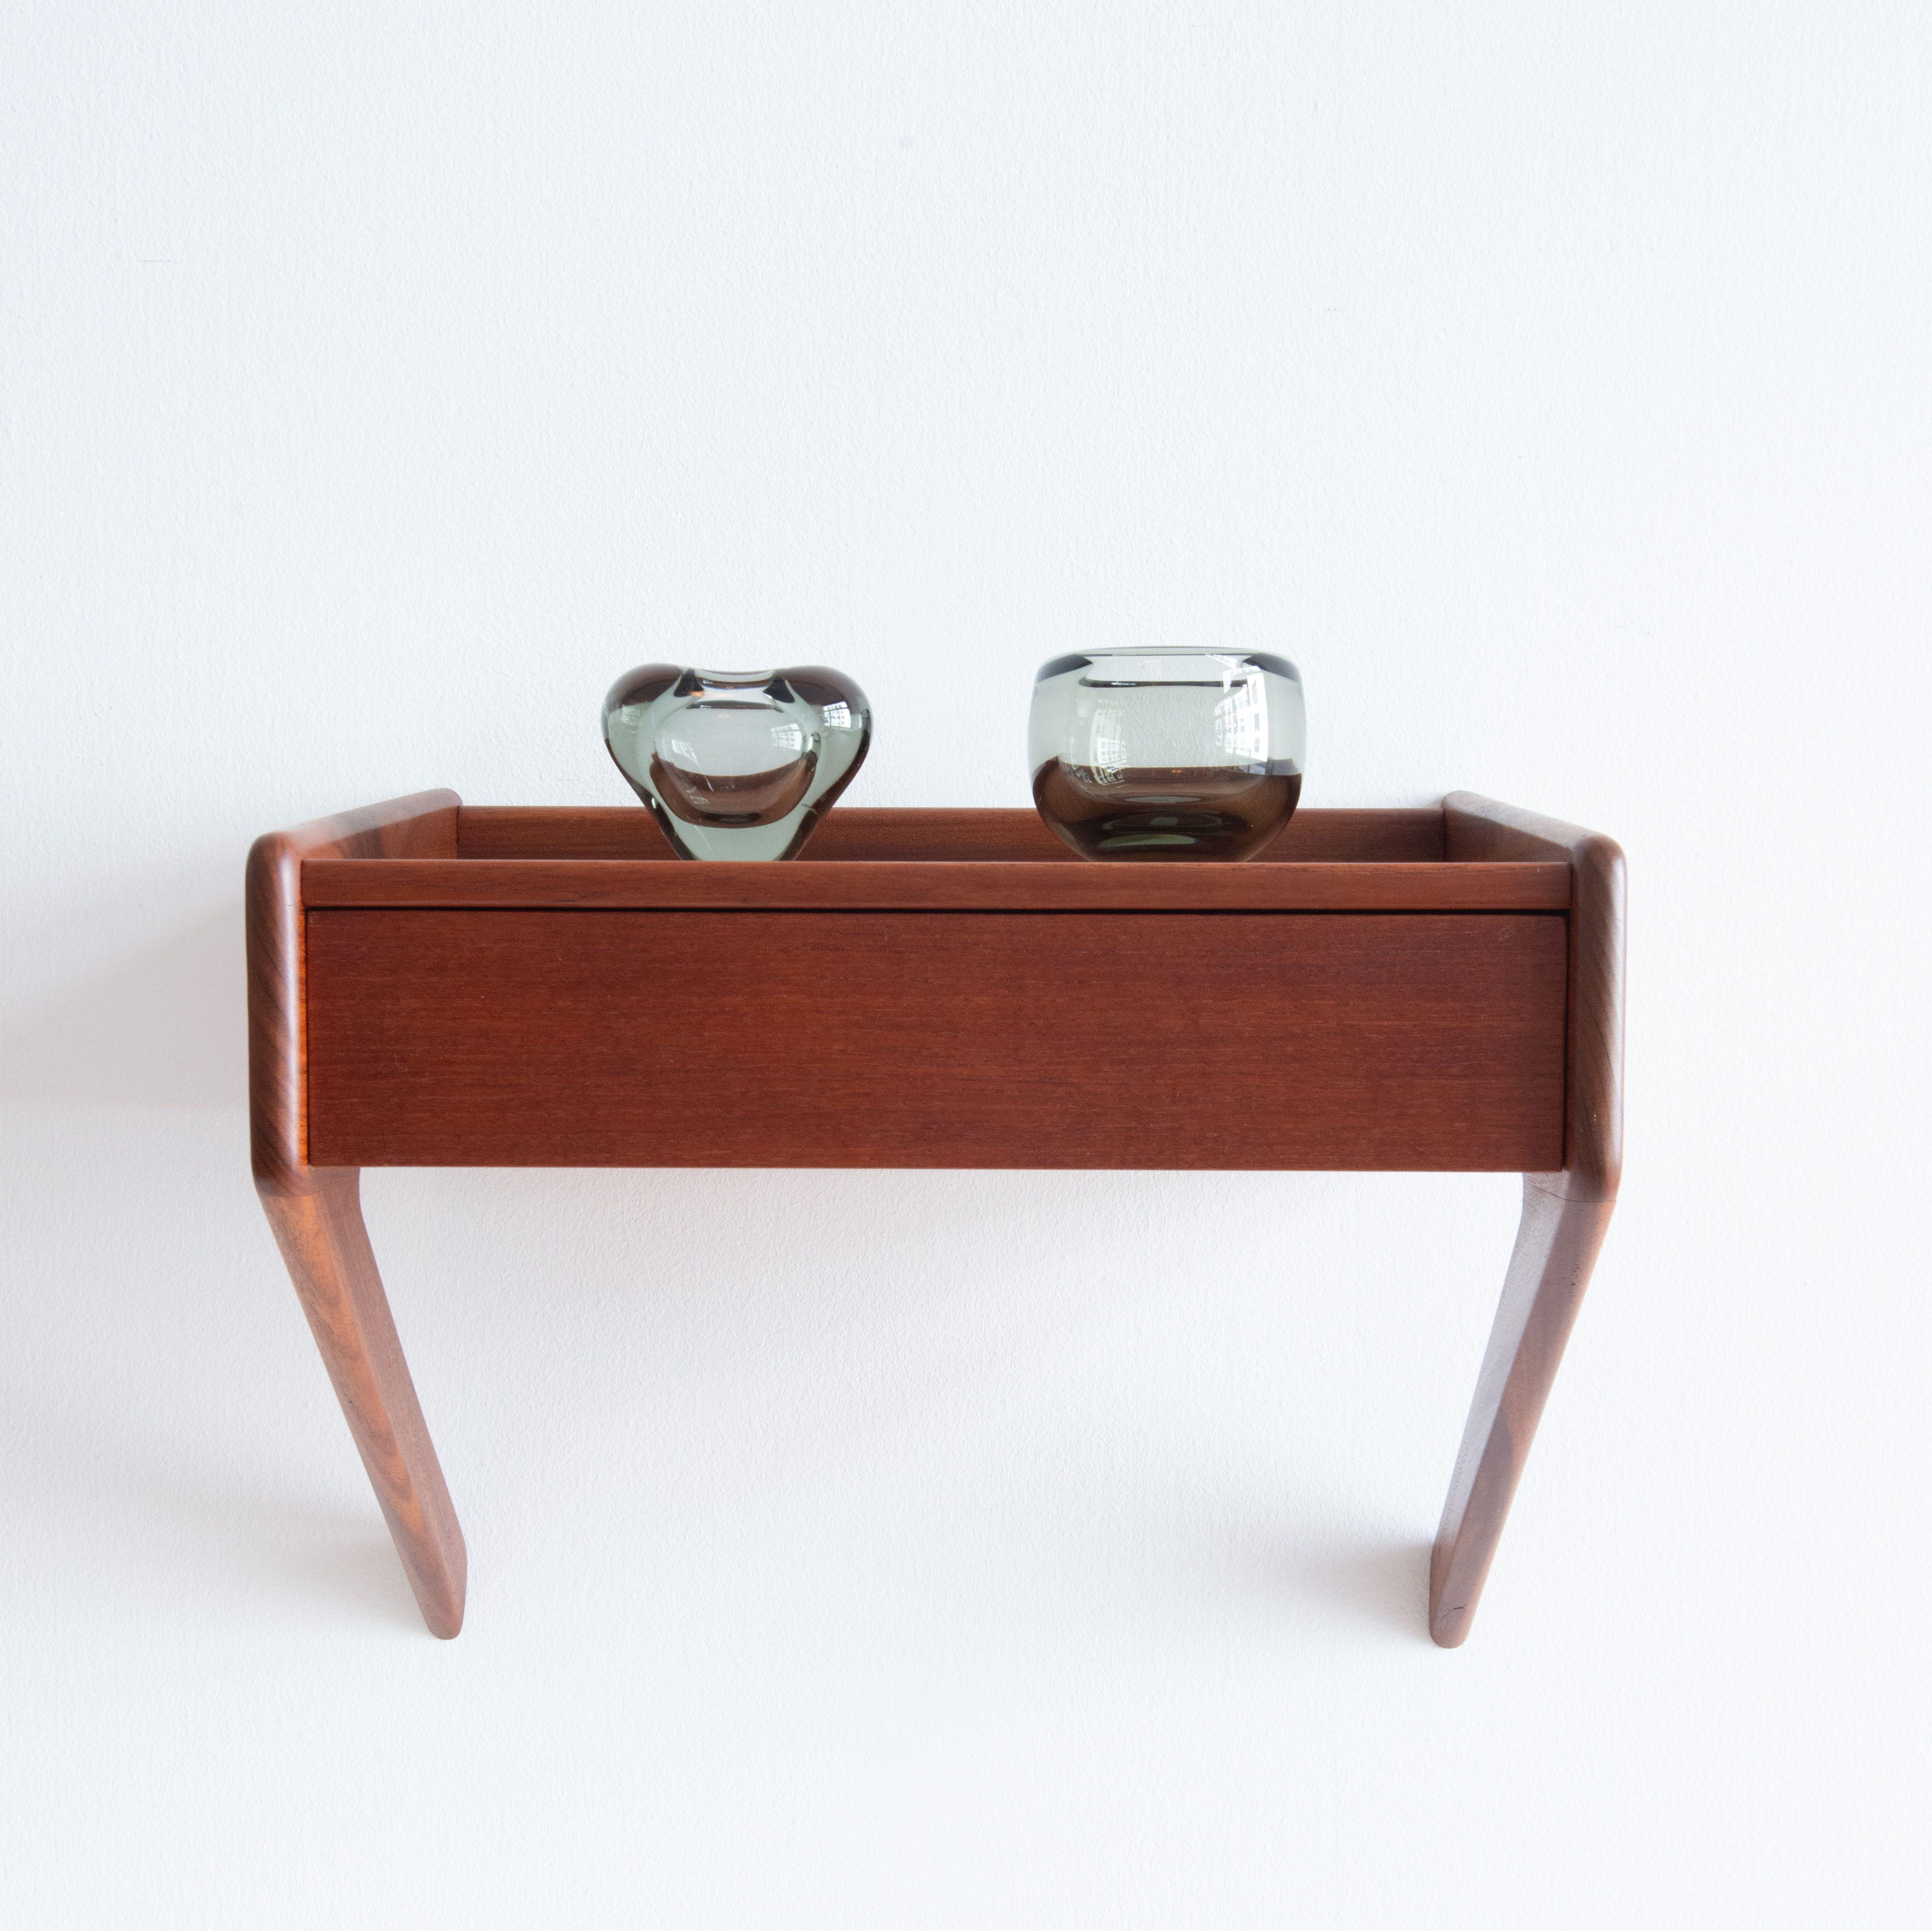 Floating Wall Consoles in Teak. Produced by Olholm Mobelfabrik in Denmark in the 1960s. Available at heyday möbel, Grubenstrasse 19, 8045 Zürich.